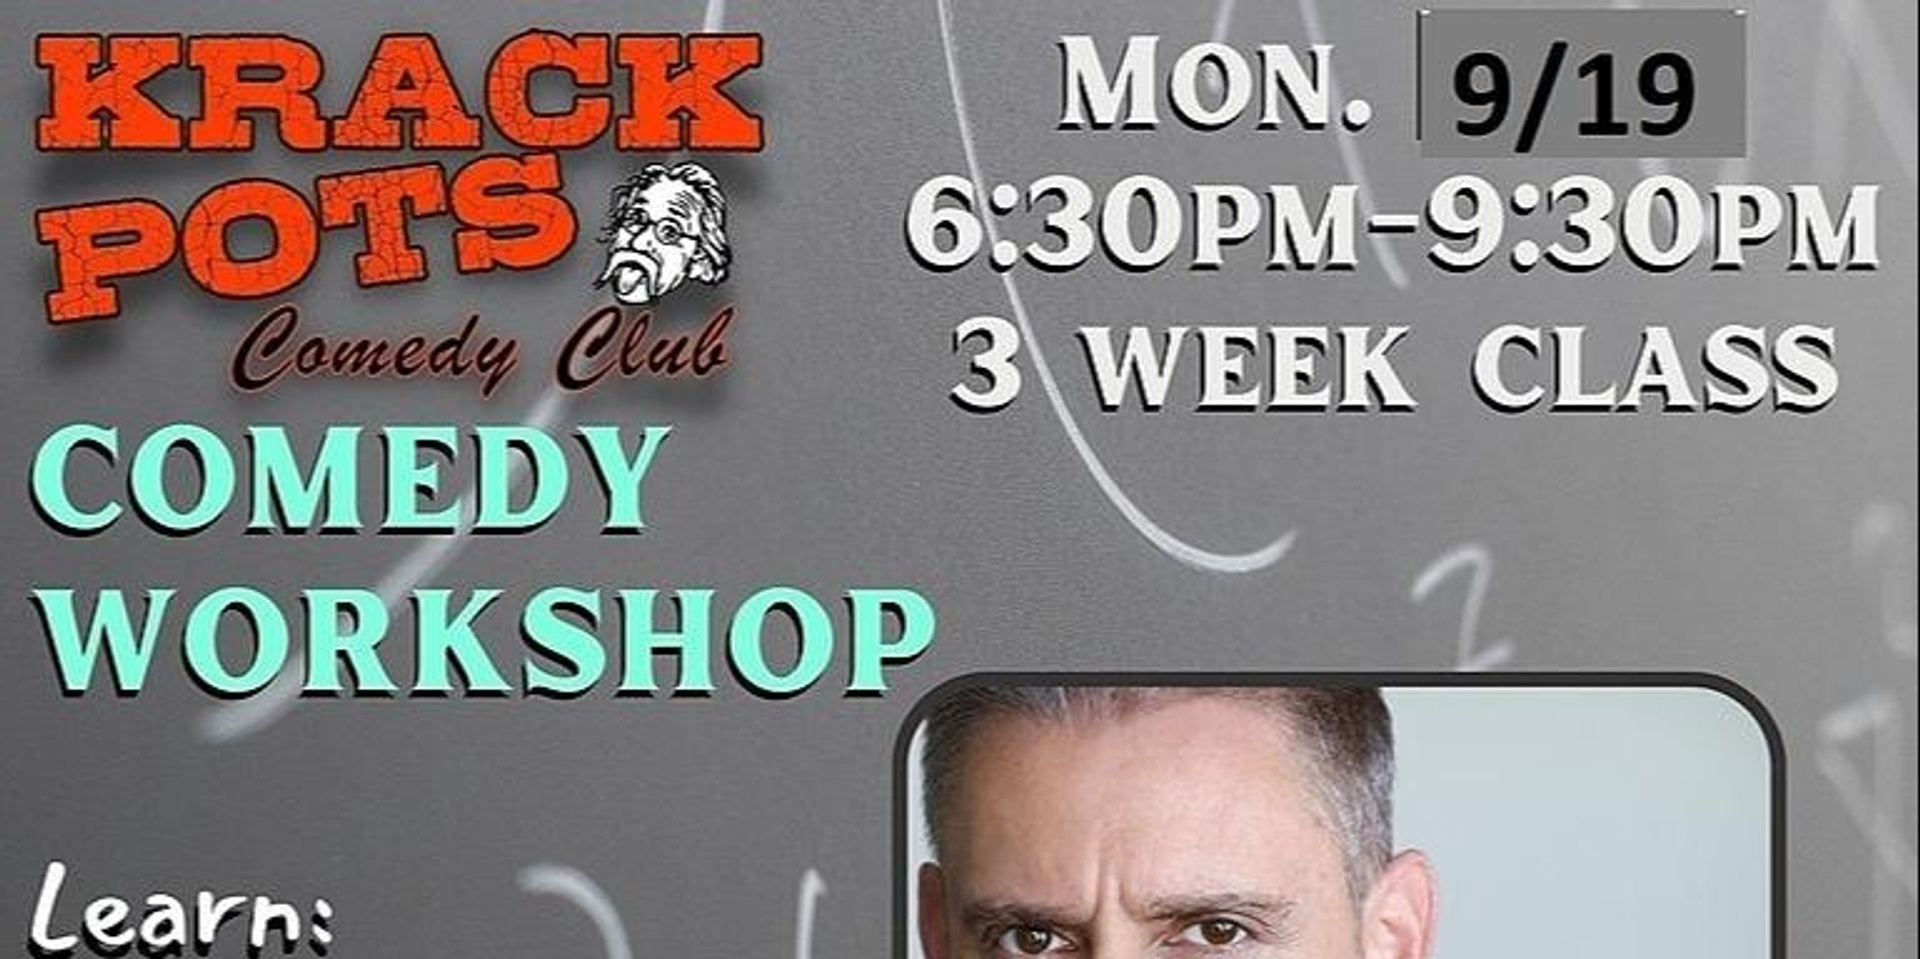 Comedy Workshop with Lou Santini